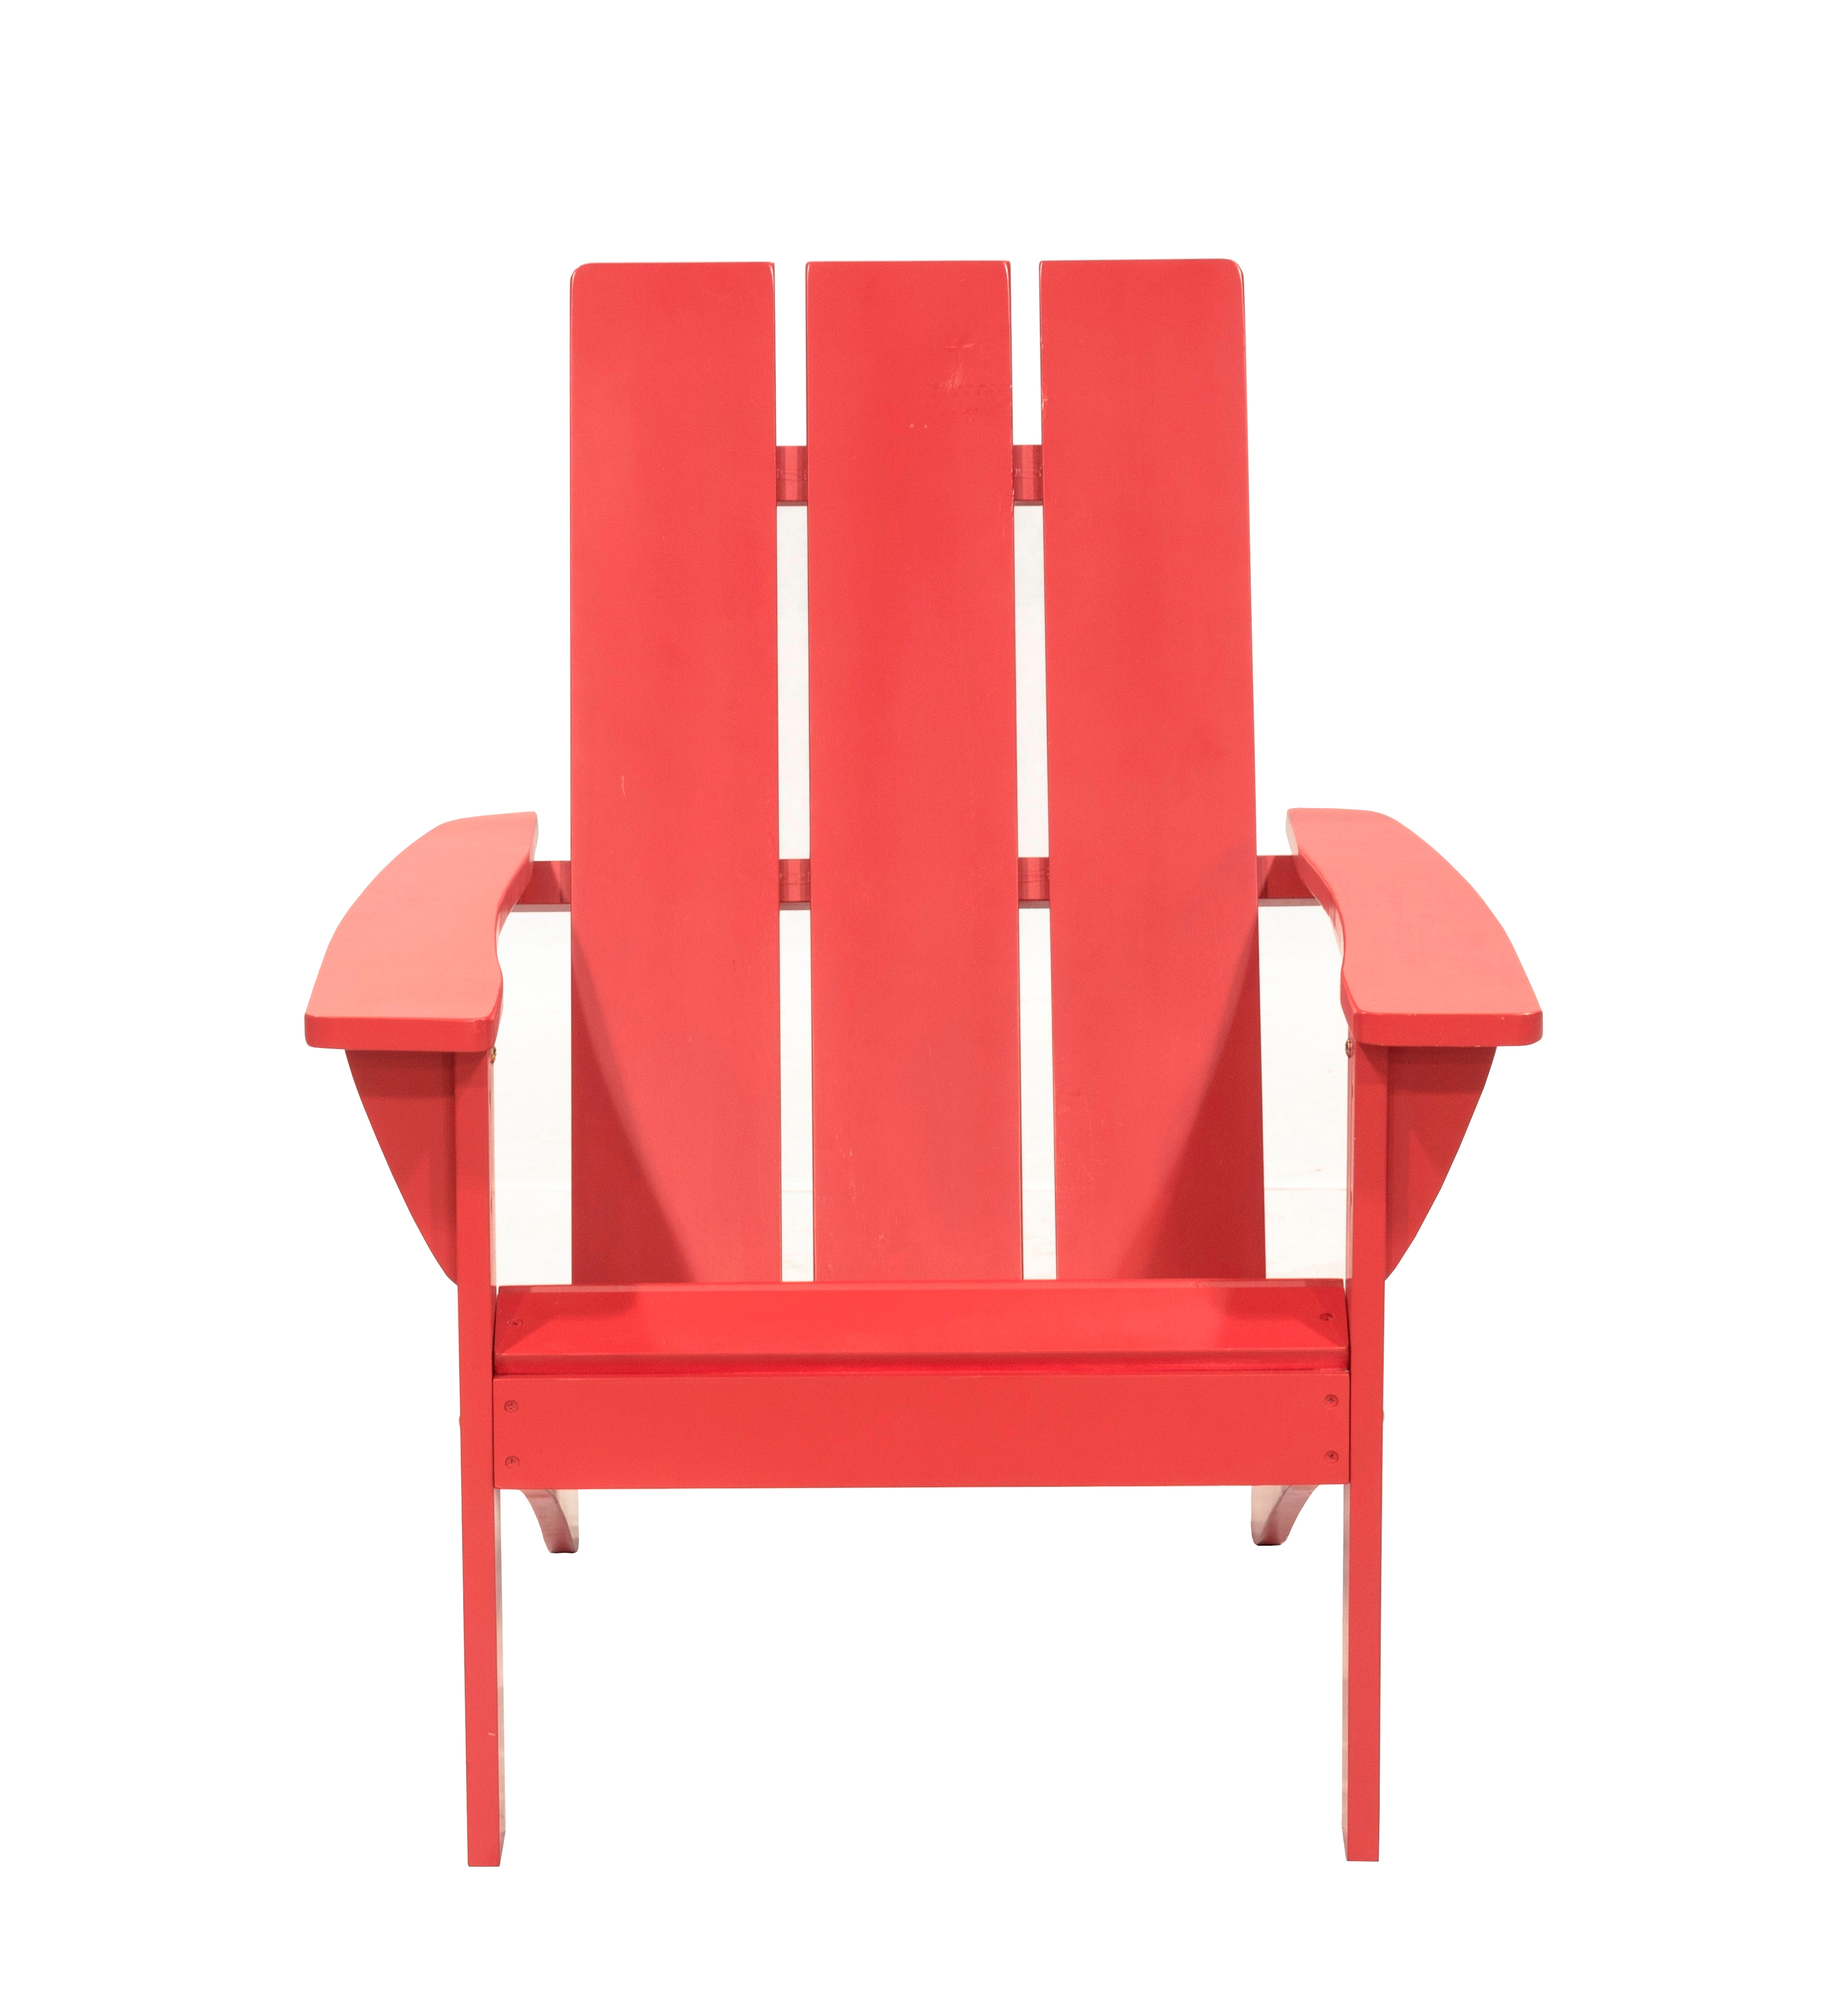 Outdoor Patio Garden Furniture 3-Piece Wood Adirondack Chair Set, Weather Resistant Finish,2 Adirondack Chairs and 1 Side Table-Red - image 4 of 11